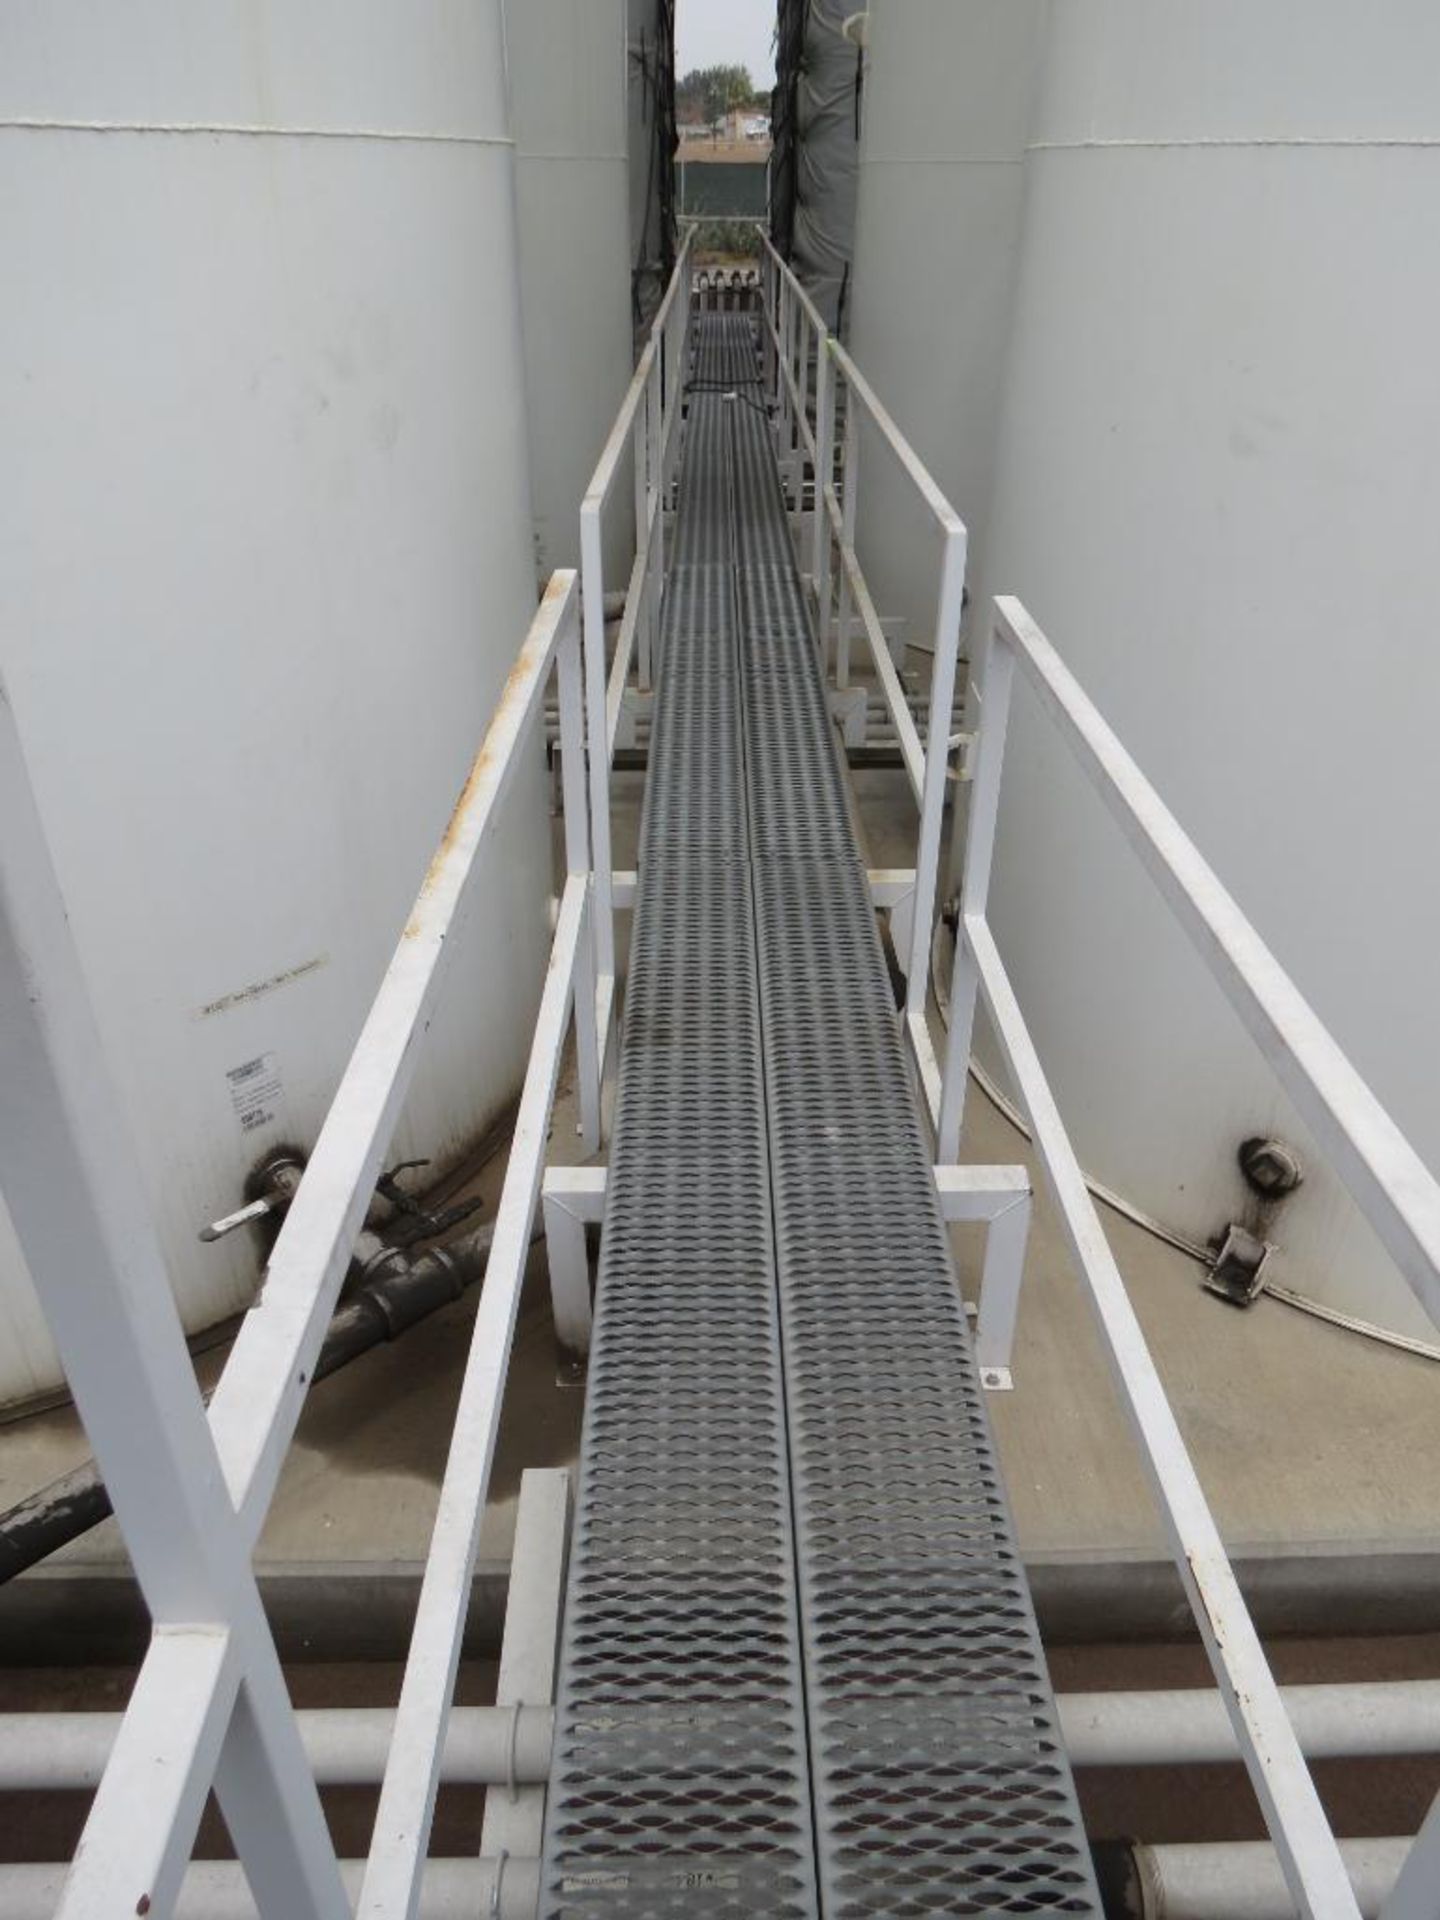 LOT: Storage Tank Metal Catwalk with Pumps and Meters - Image 9 of 20